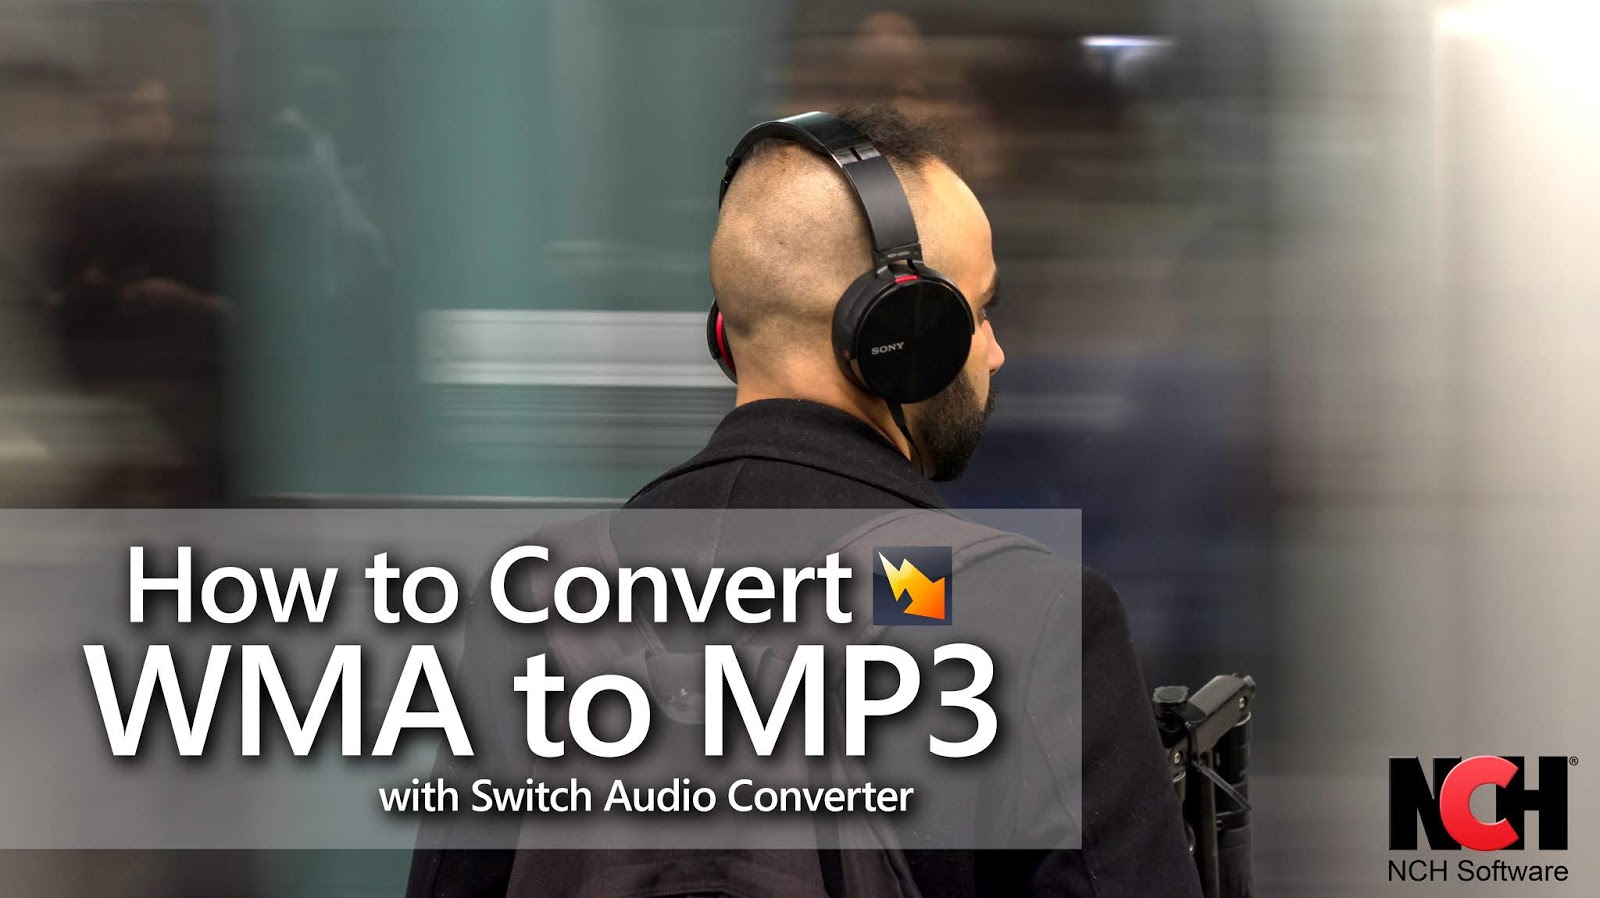 Do More With Software: to Change WMA to MP3 with Switch Audio